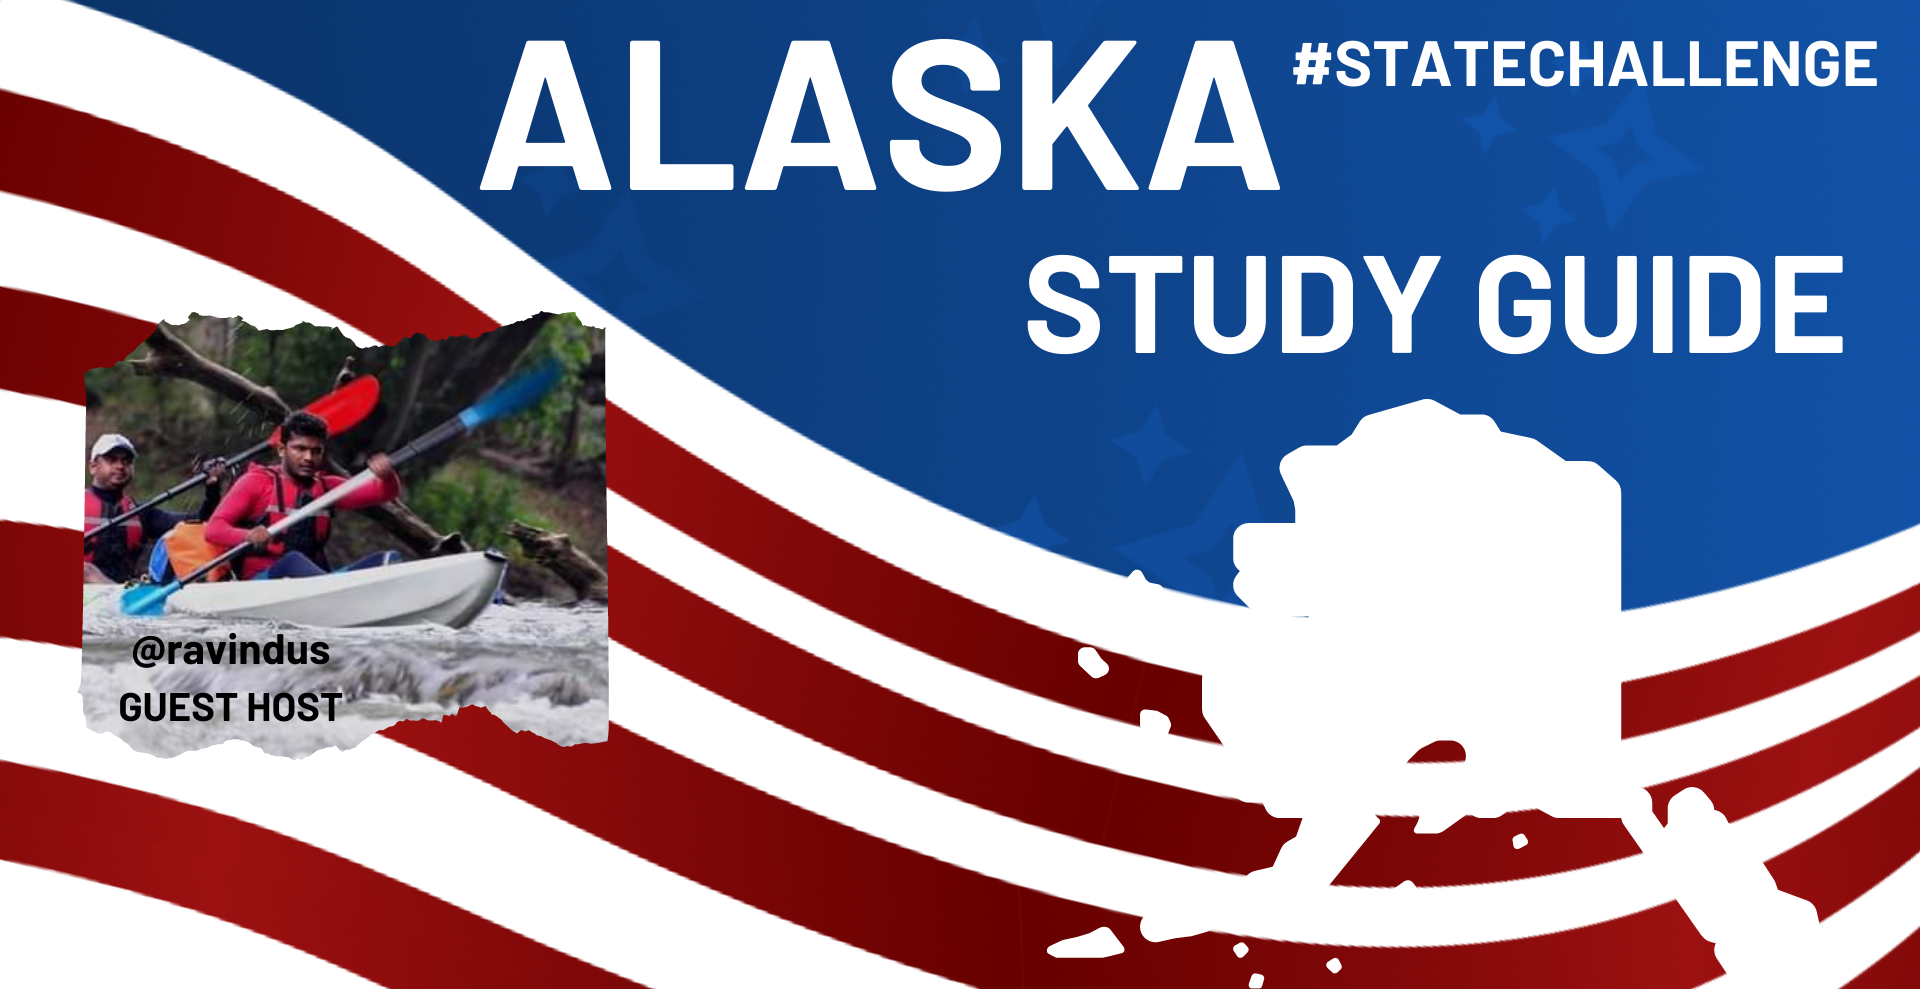 Local Guides Connect - Alaska "The Last Frontier" #StateChallenge STUDY